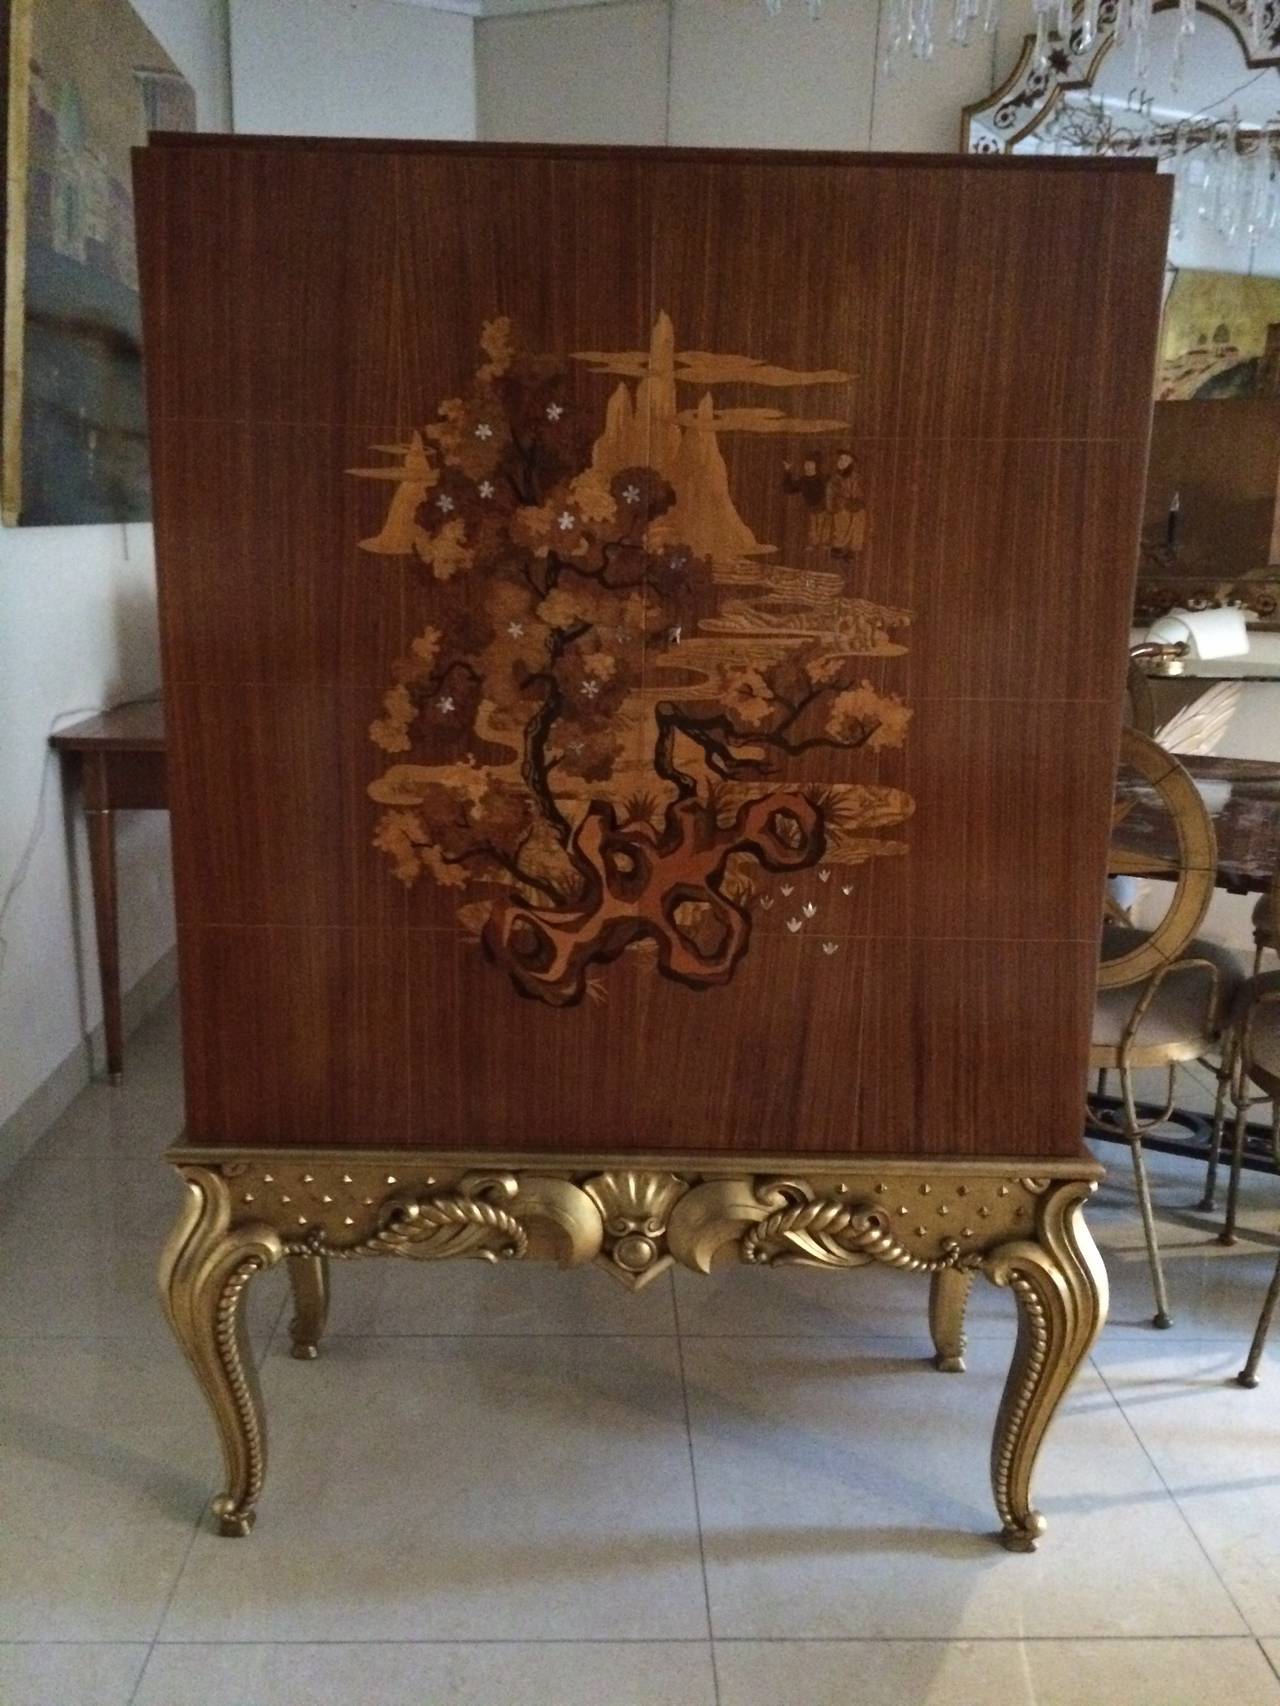 Very rare cabinet on a gold Leaf sculpted legs.
Marqueterie of different woods and mothership of pearls inlays.
Stamped on the inside left door.
MD.